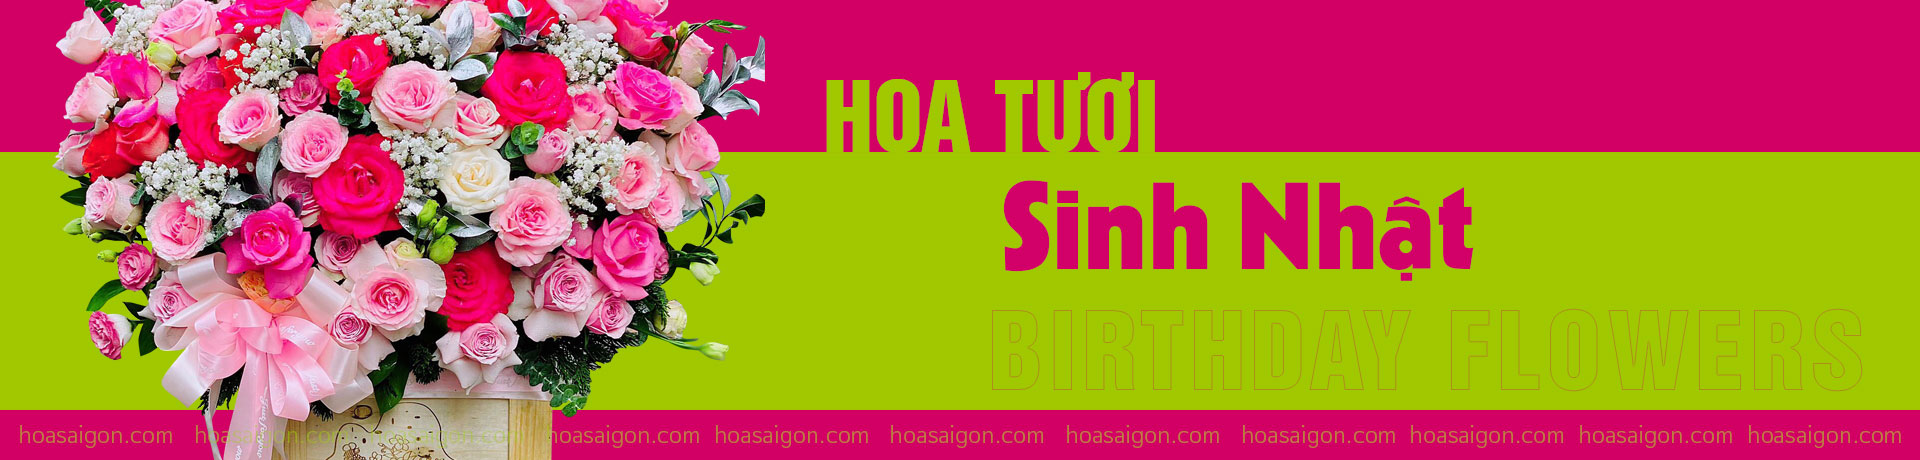 hoasinhnhat-background-title-page02-1920x450